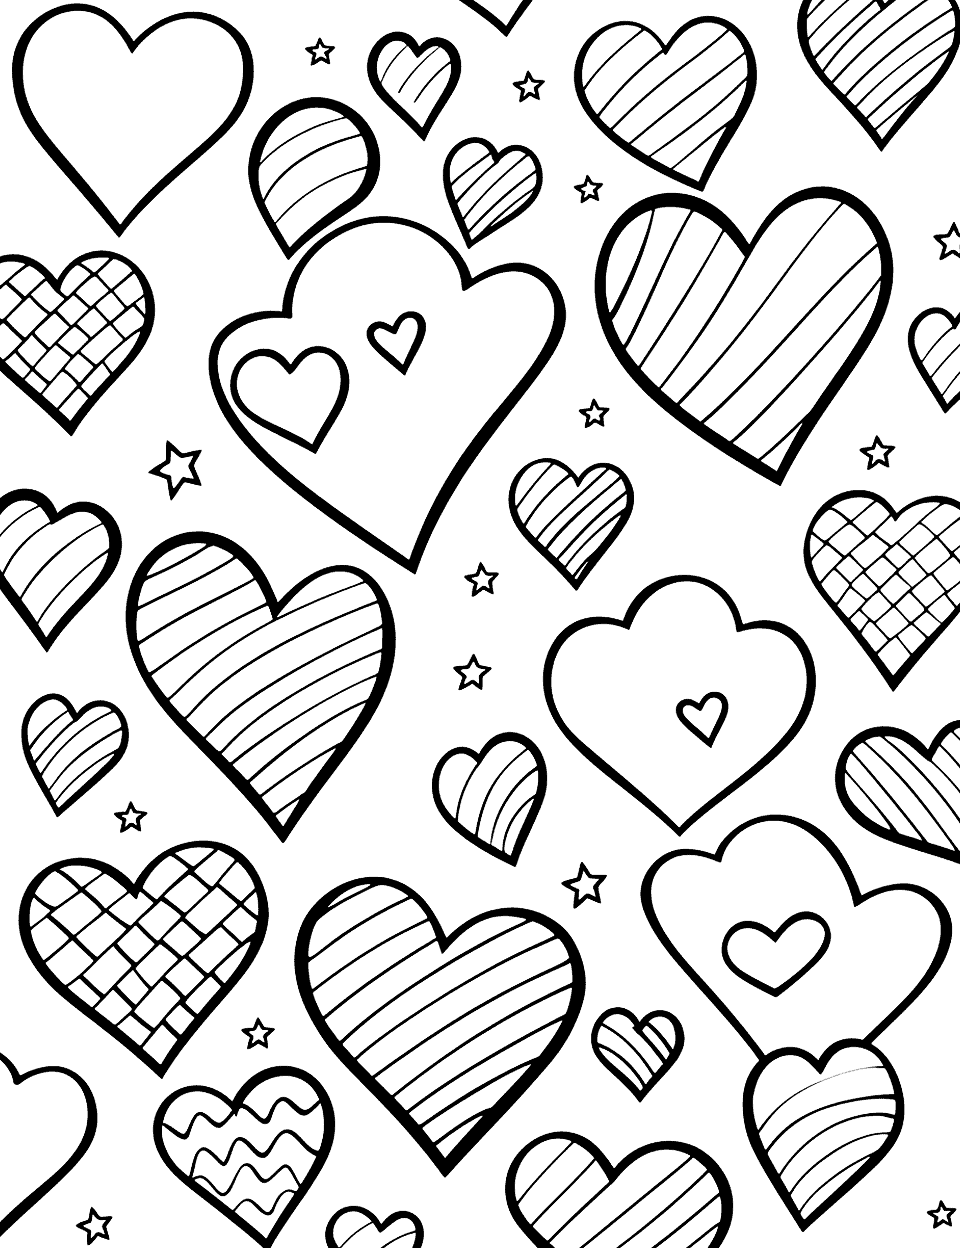 Hearts and Stars Heart Coloring Page - A page full of hearts and stars intermixed, perfect for developing fine motor skills.